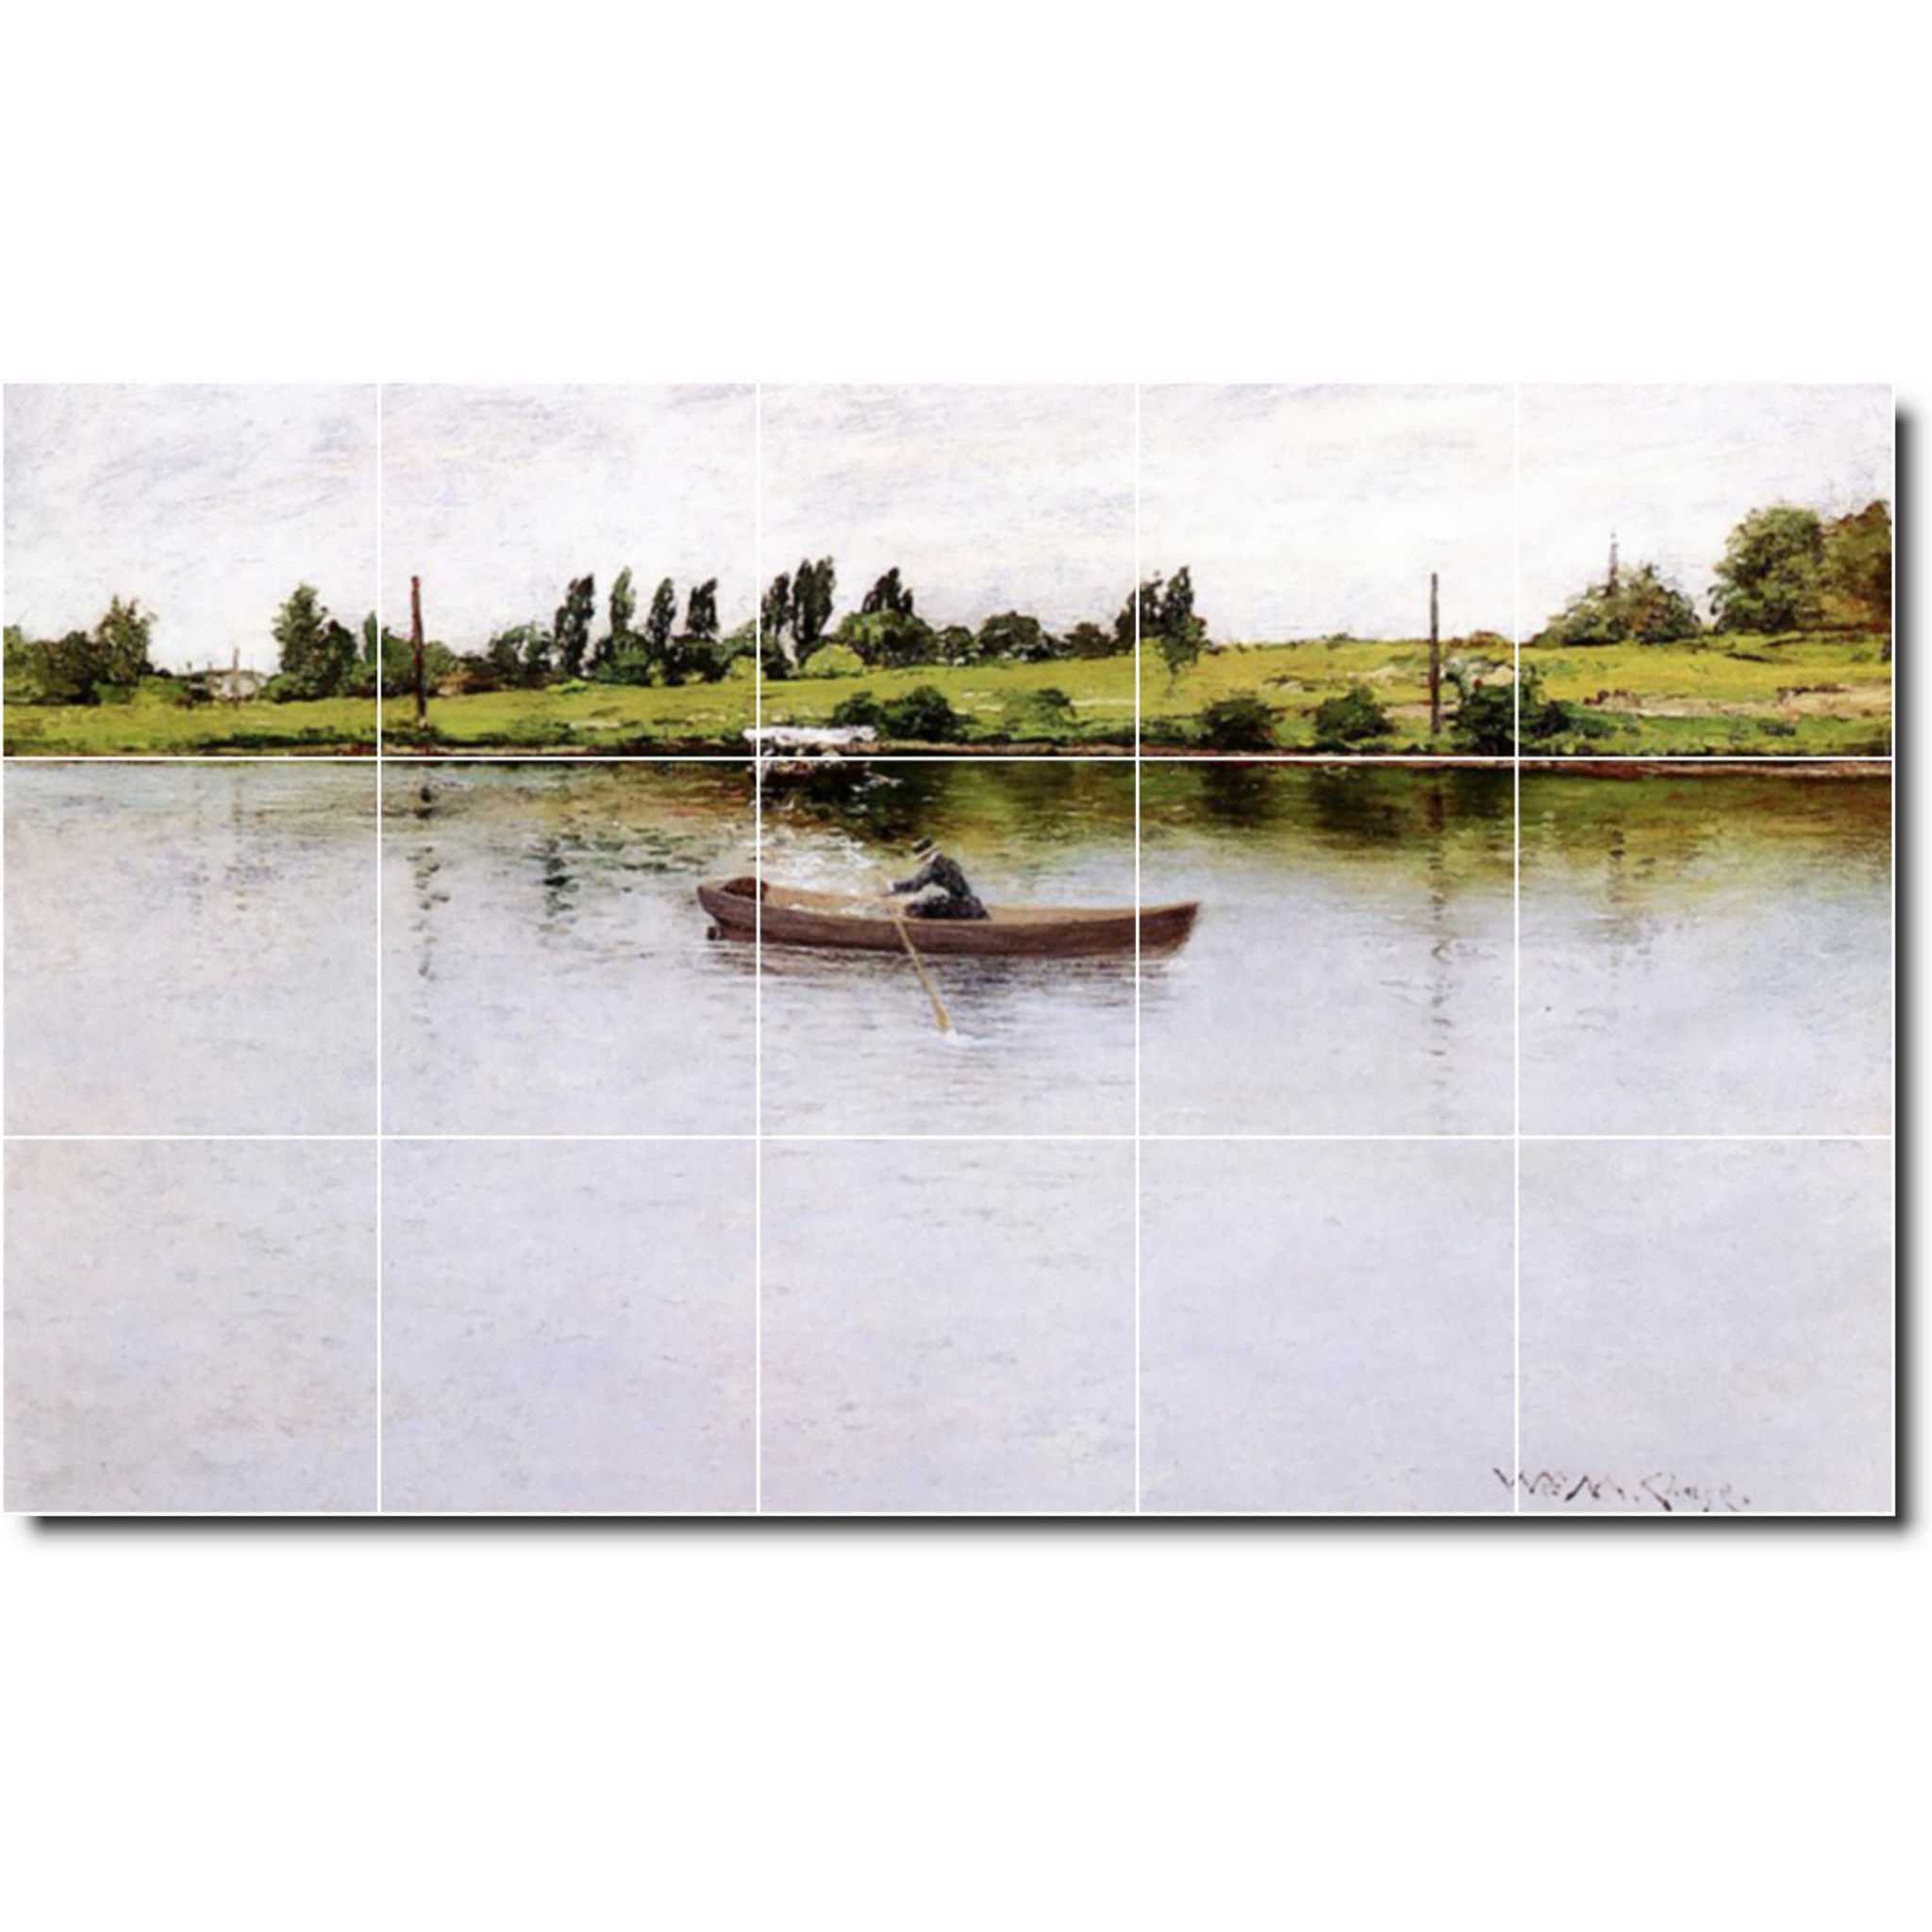 william chase waterfront painting ceramic tile mural p01611